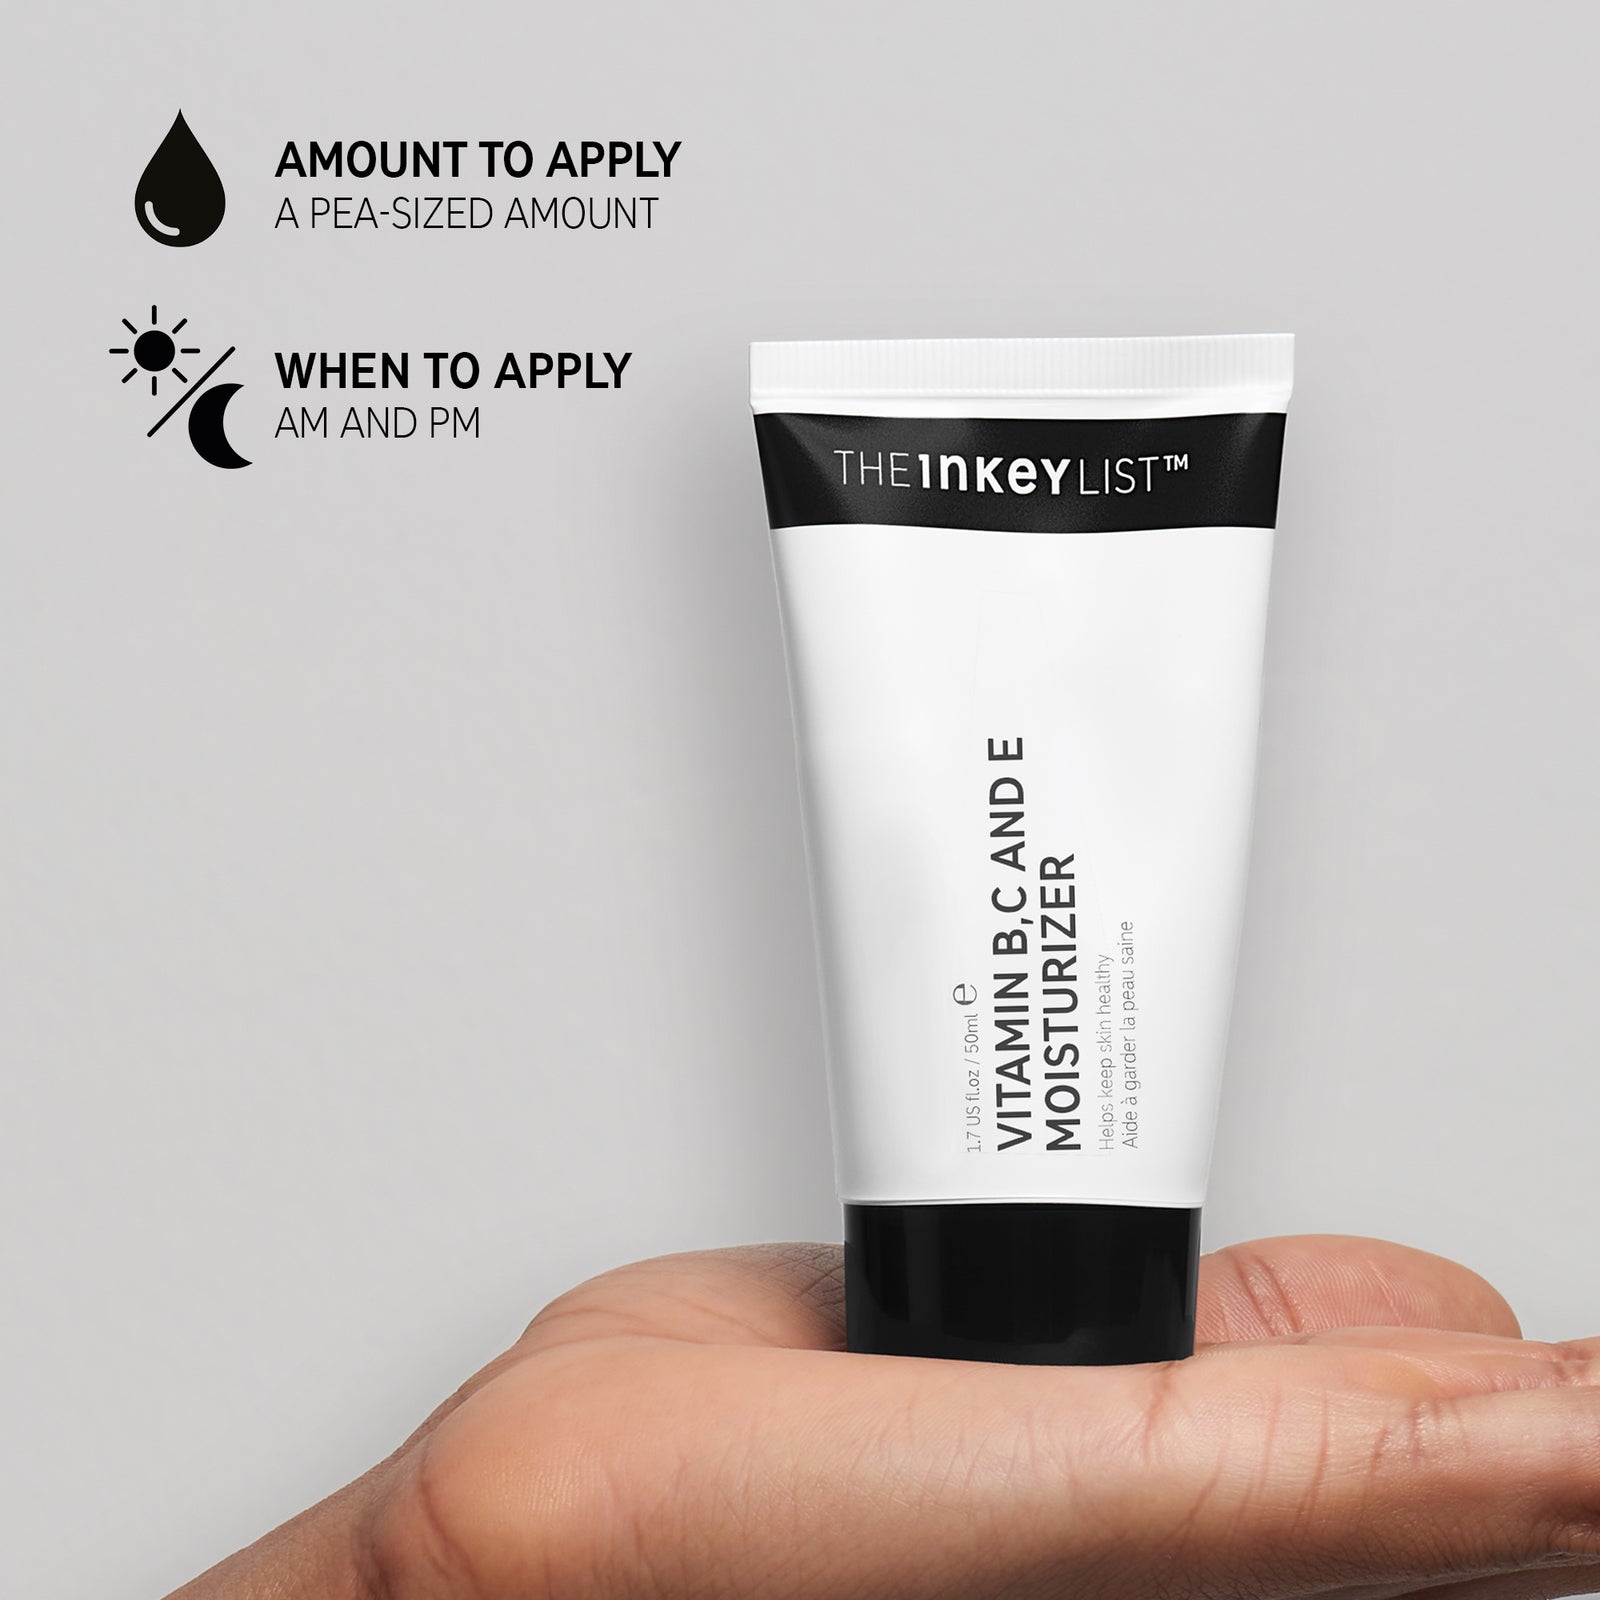 Hand holding Vitamin B, C and E Moisturizer against a grey background with black text that explains amount to apply (pea-szied amount) and when to use it in your routine (AM and PM)